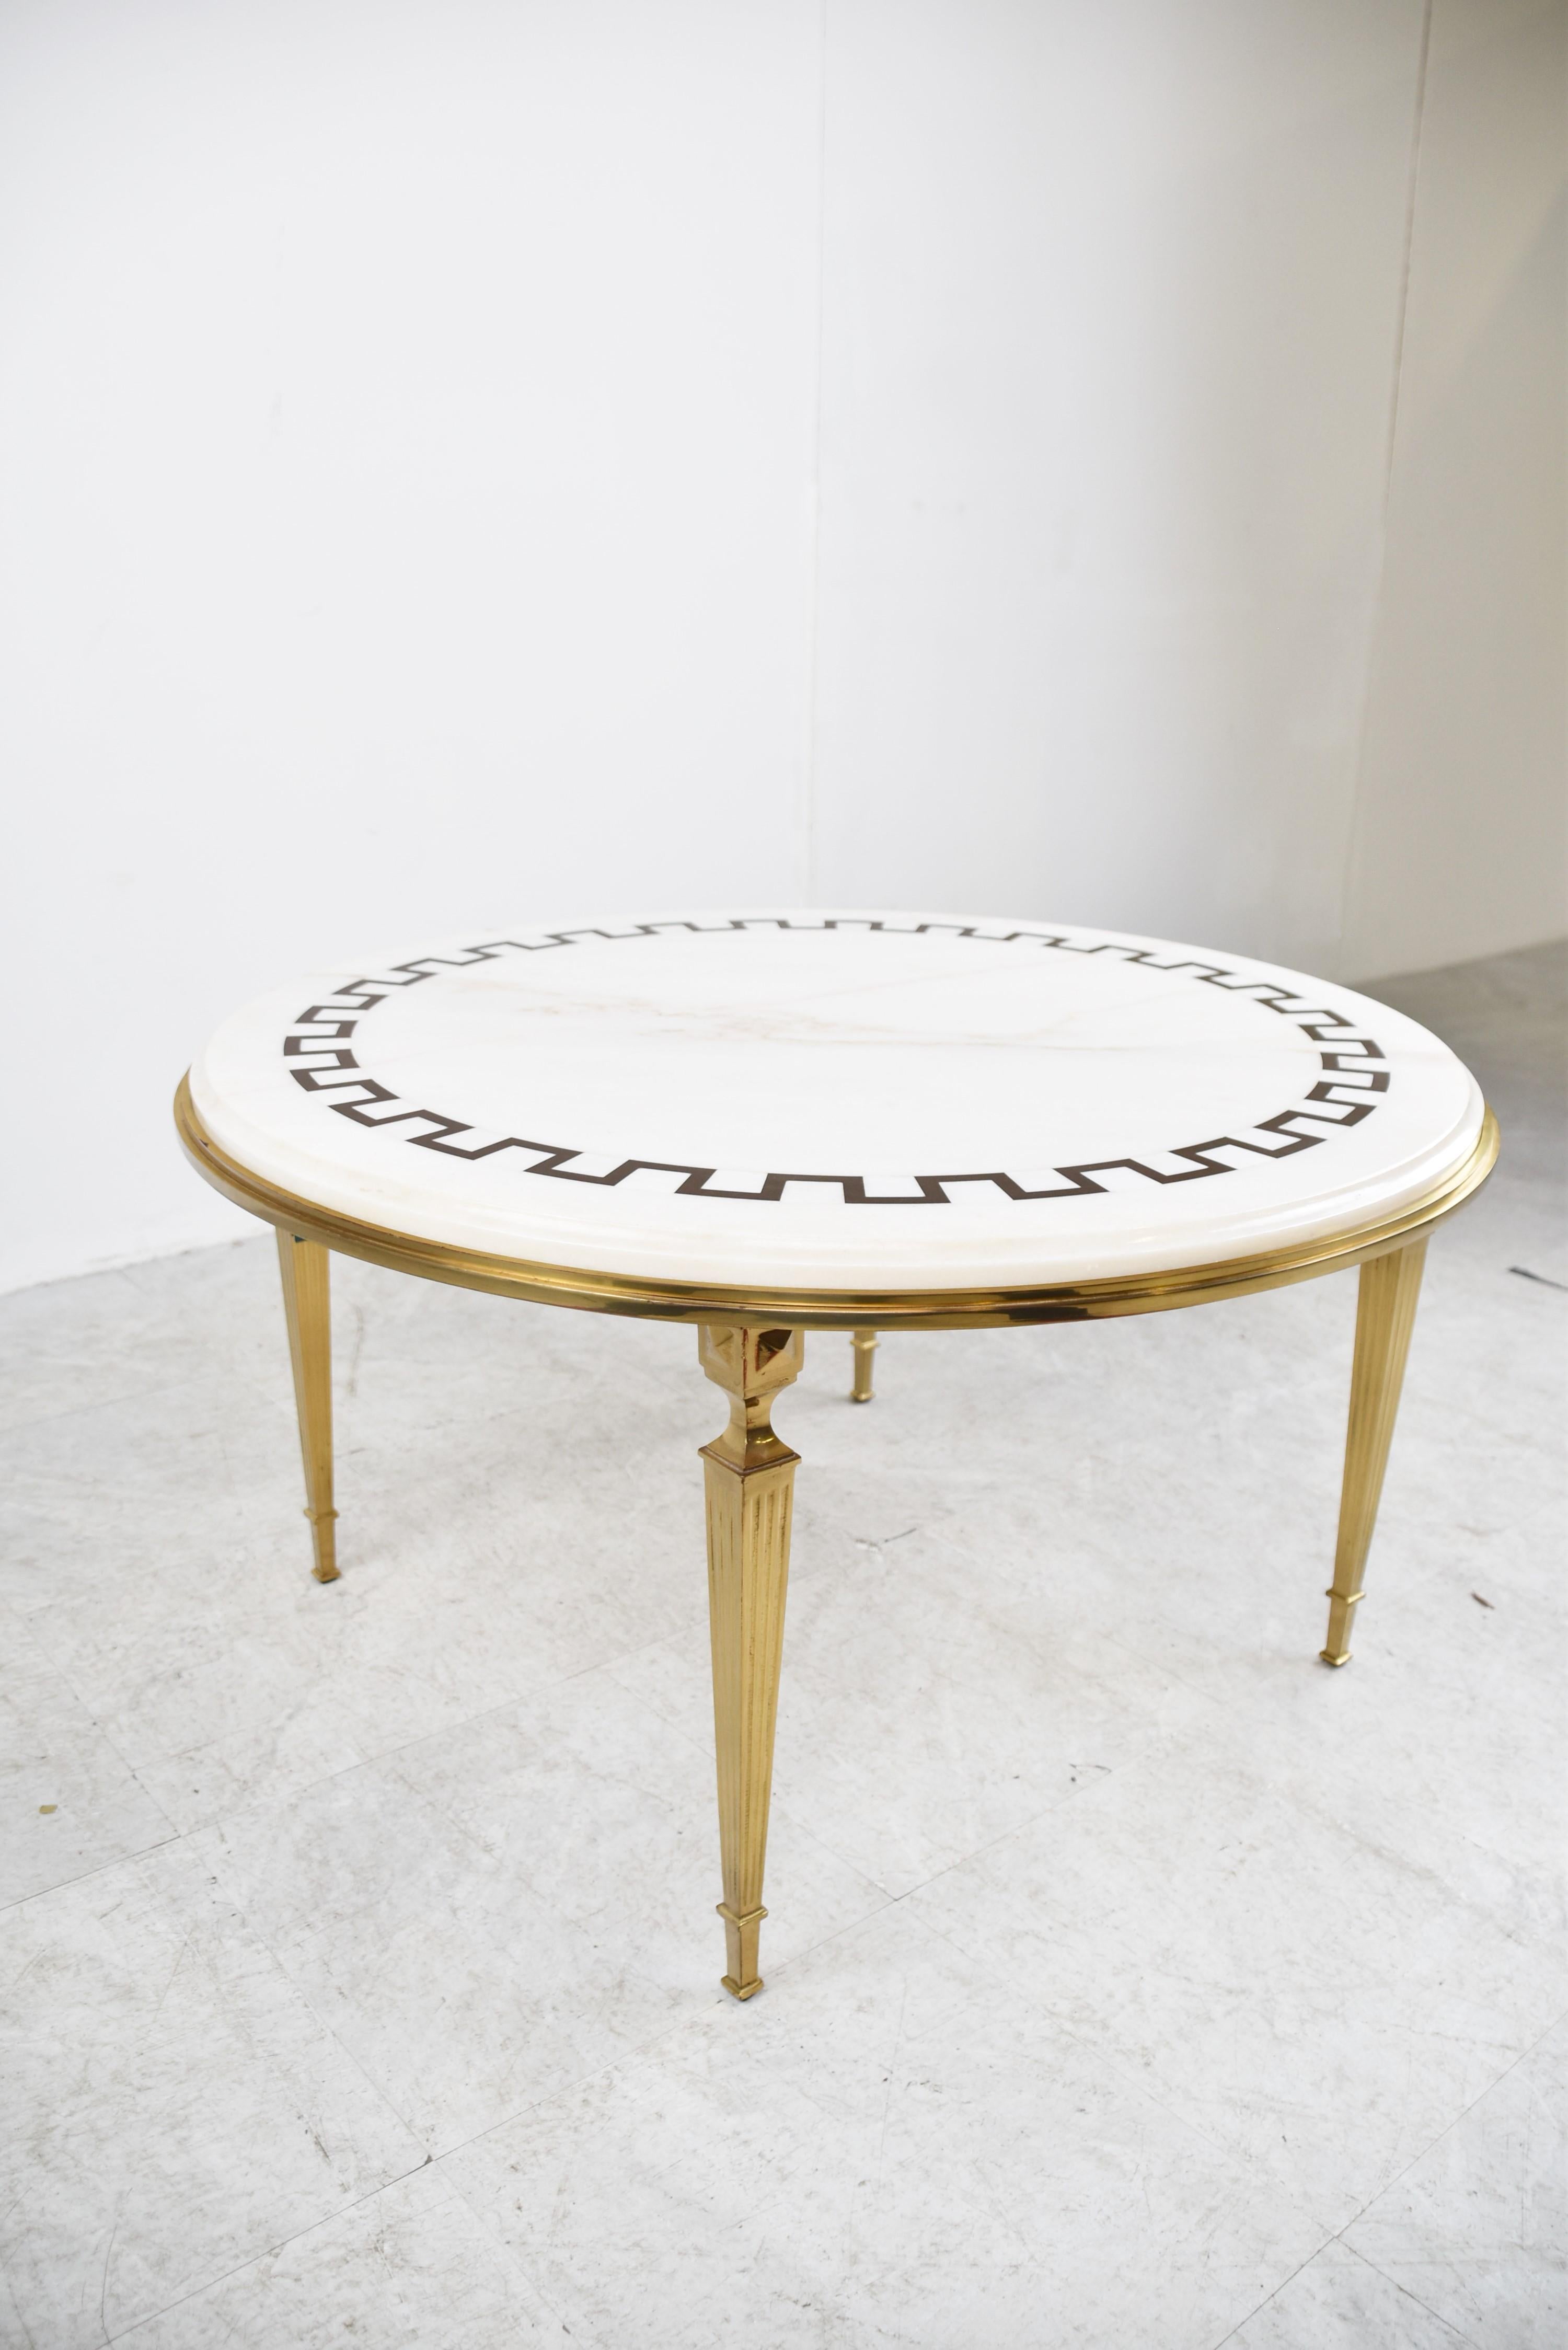 Vintage Brass and White Marble Coffee Table, 1970s For Sale 4